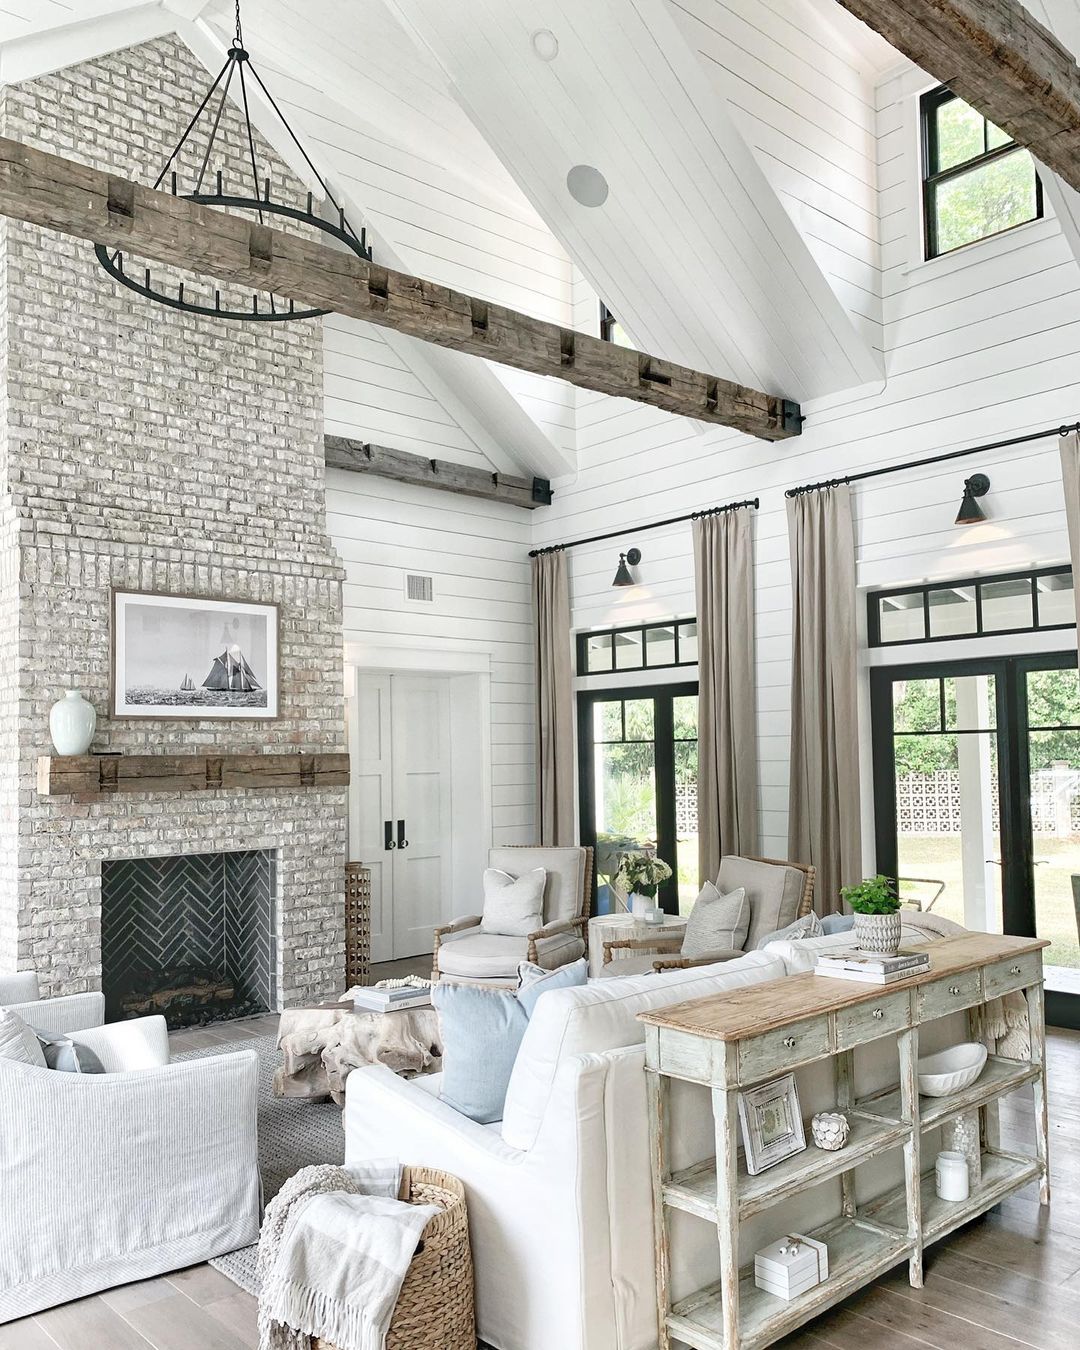 Combining Weathered Beams and Bright Shiplap in a Cosy Living Space